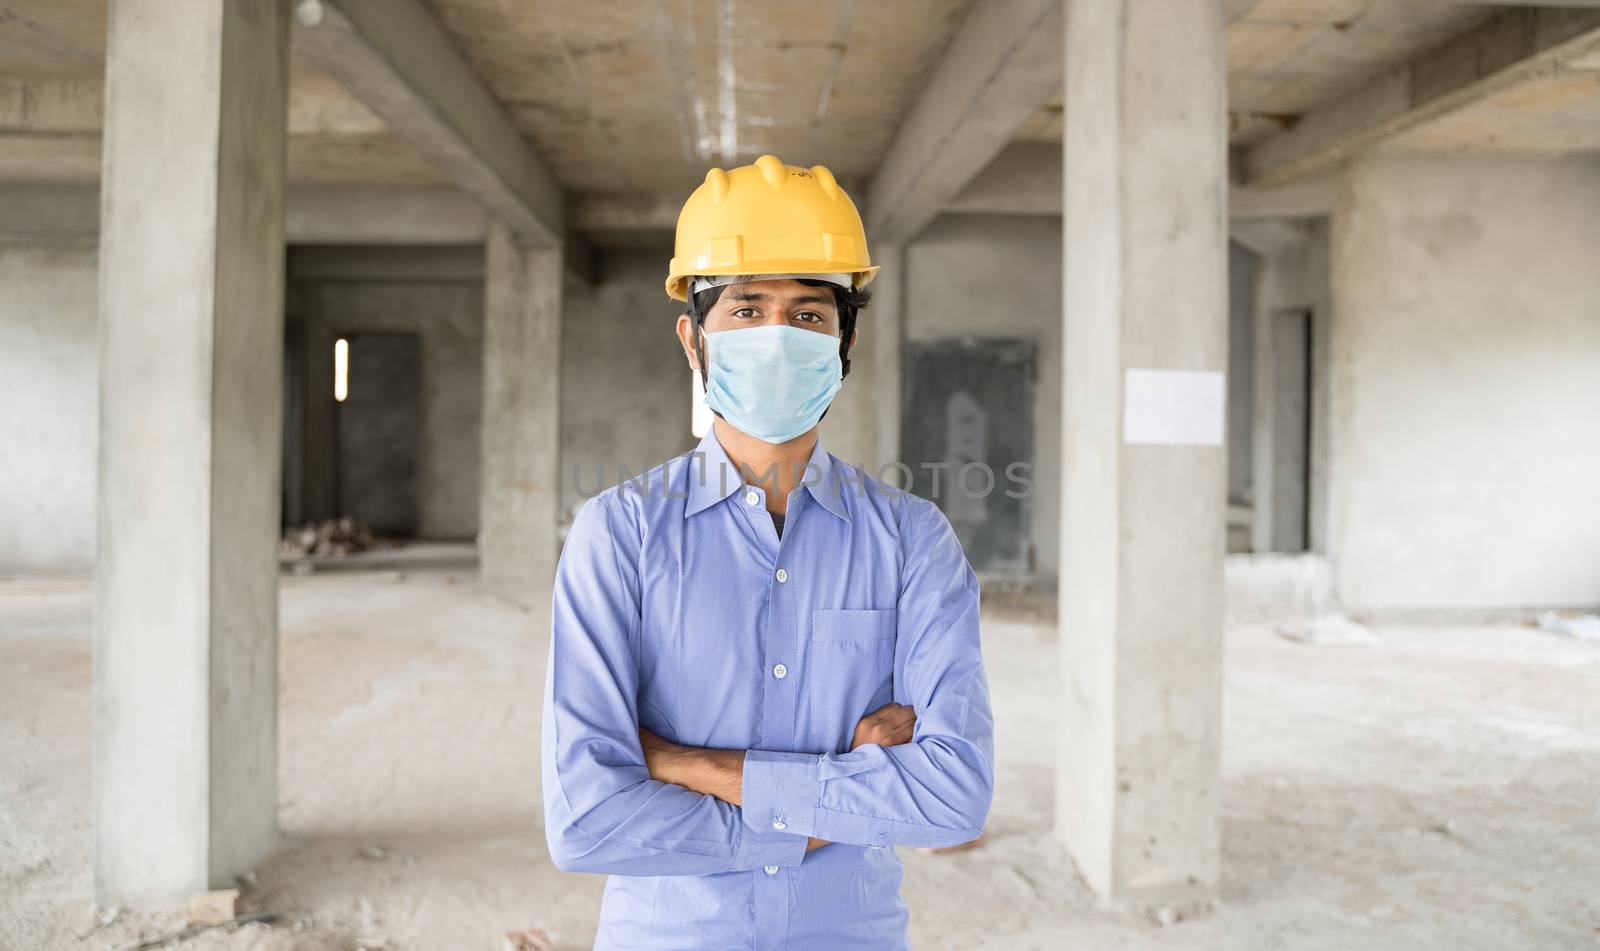 Concept of back to work, opening of construction sites after covid-19 pandemic - portrait of confident construction worker in a construction helmet arms crossed with medical mask at site.